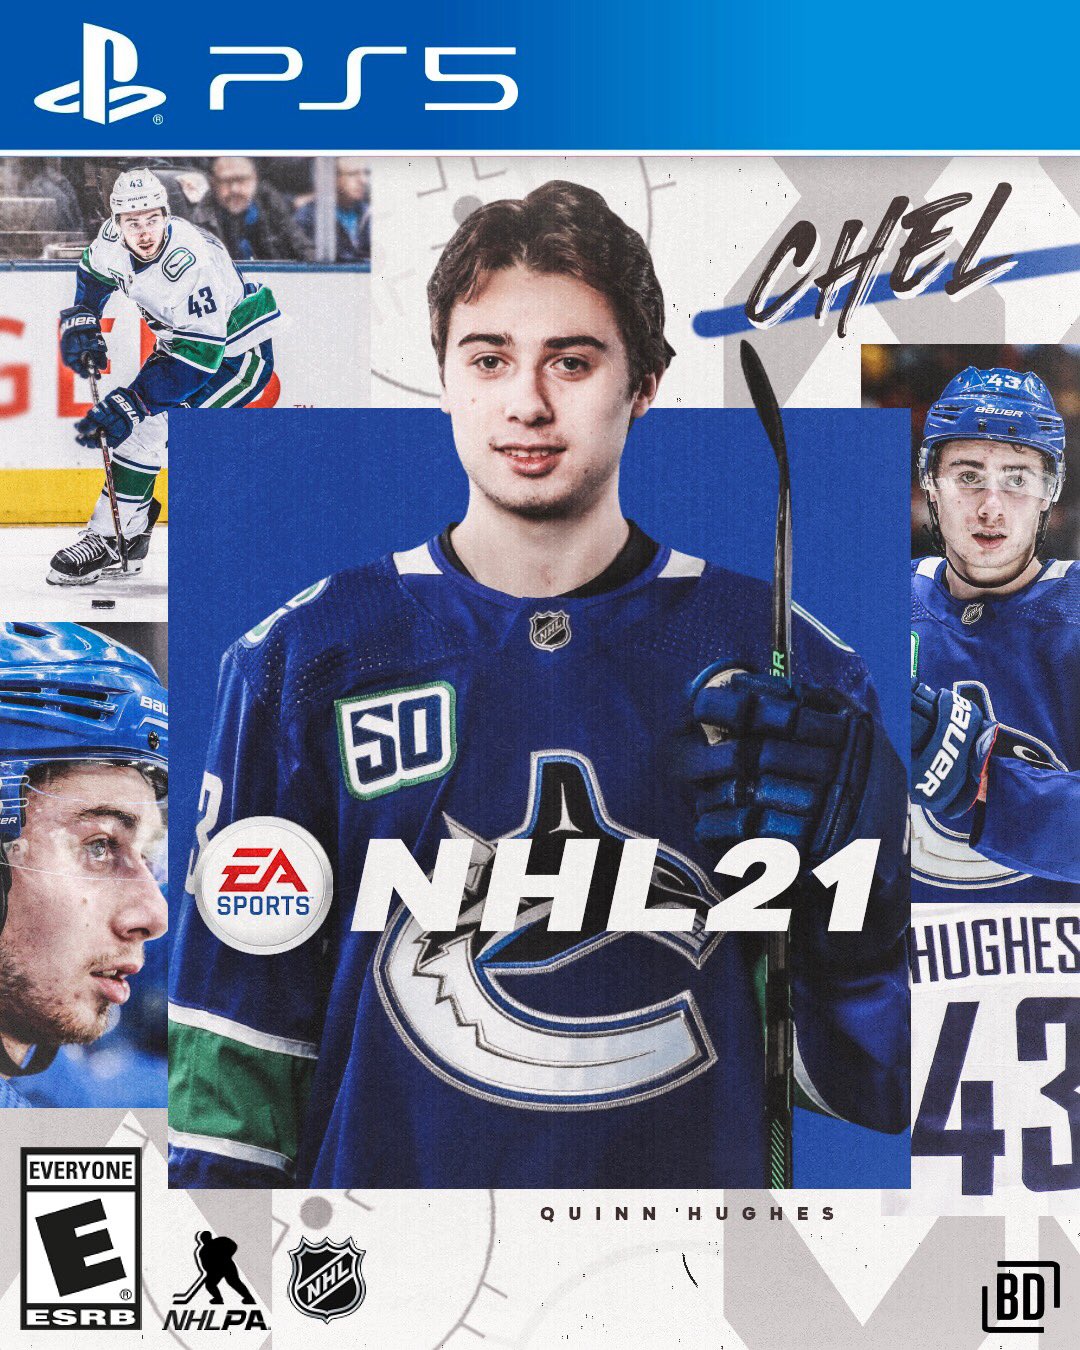 Bardown On Twitter Nhl 21 Concept Covers Who Do You Want To See On The Cover This Year